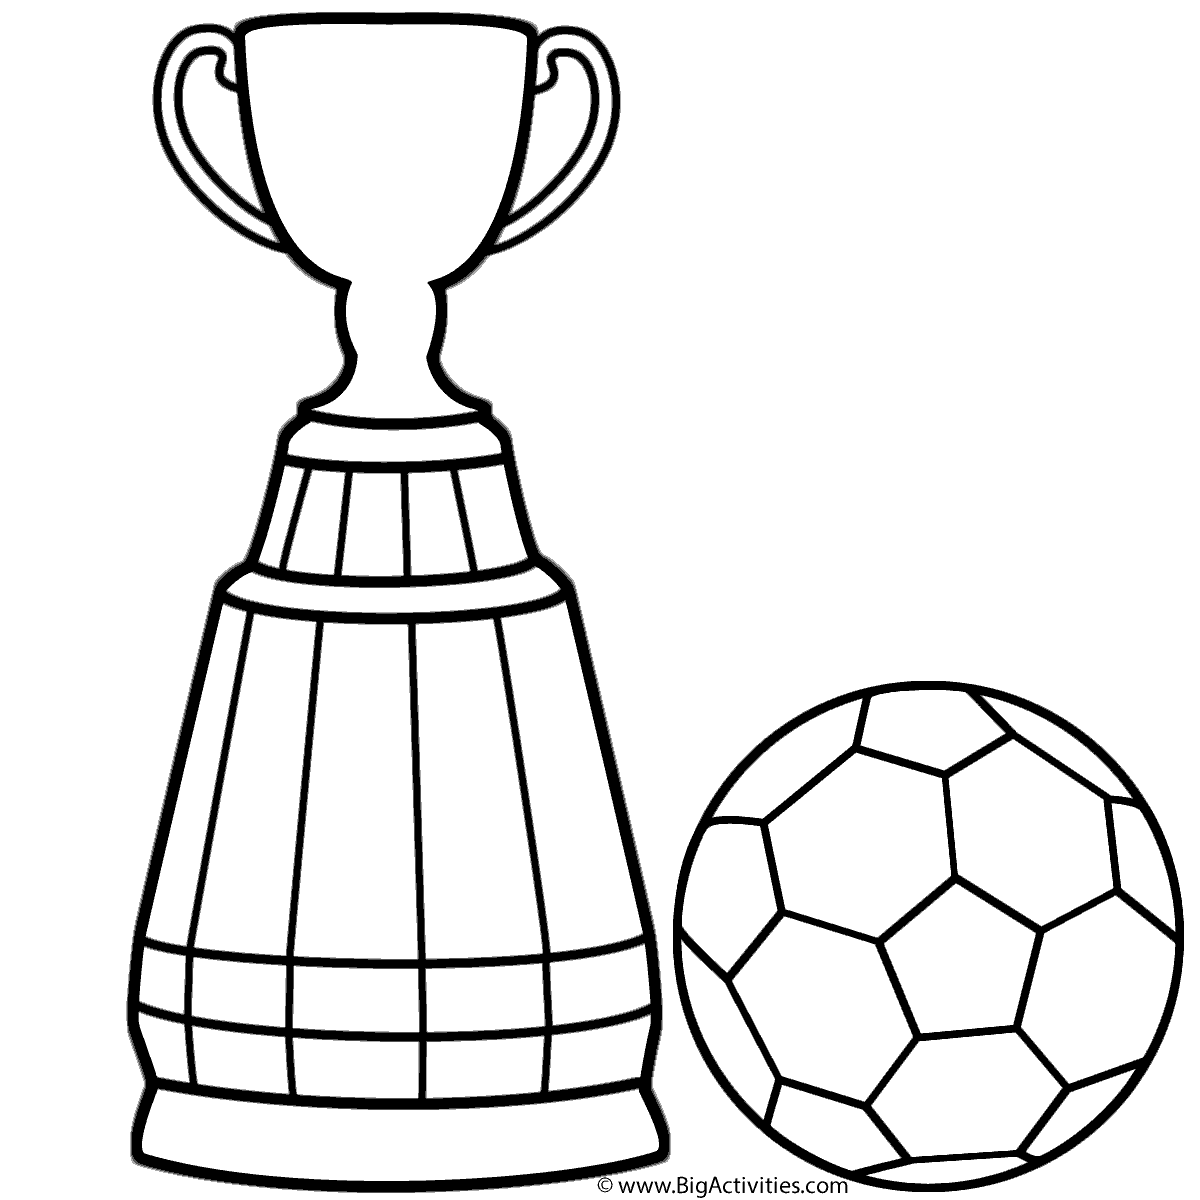 World Cup Trophy with Soccer Ball - Coloring Page (World Cup)